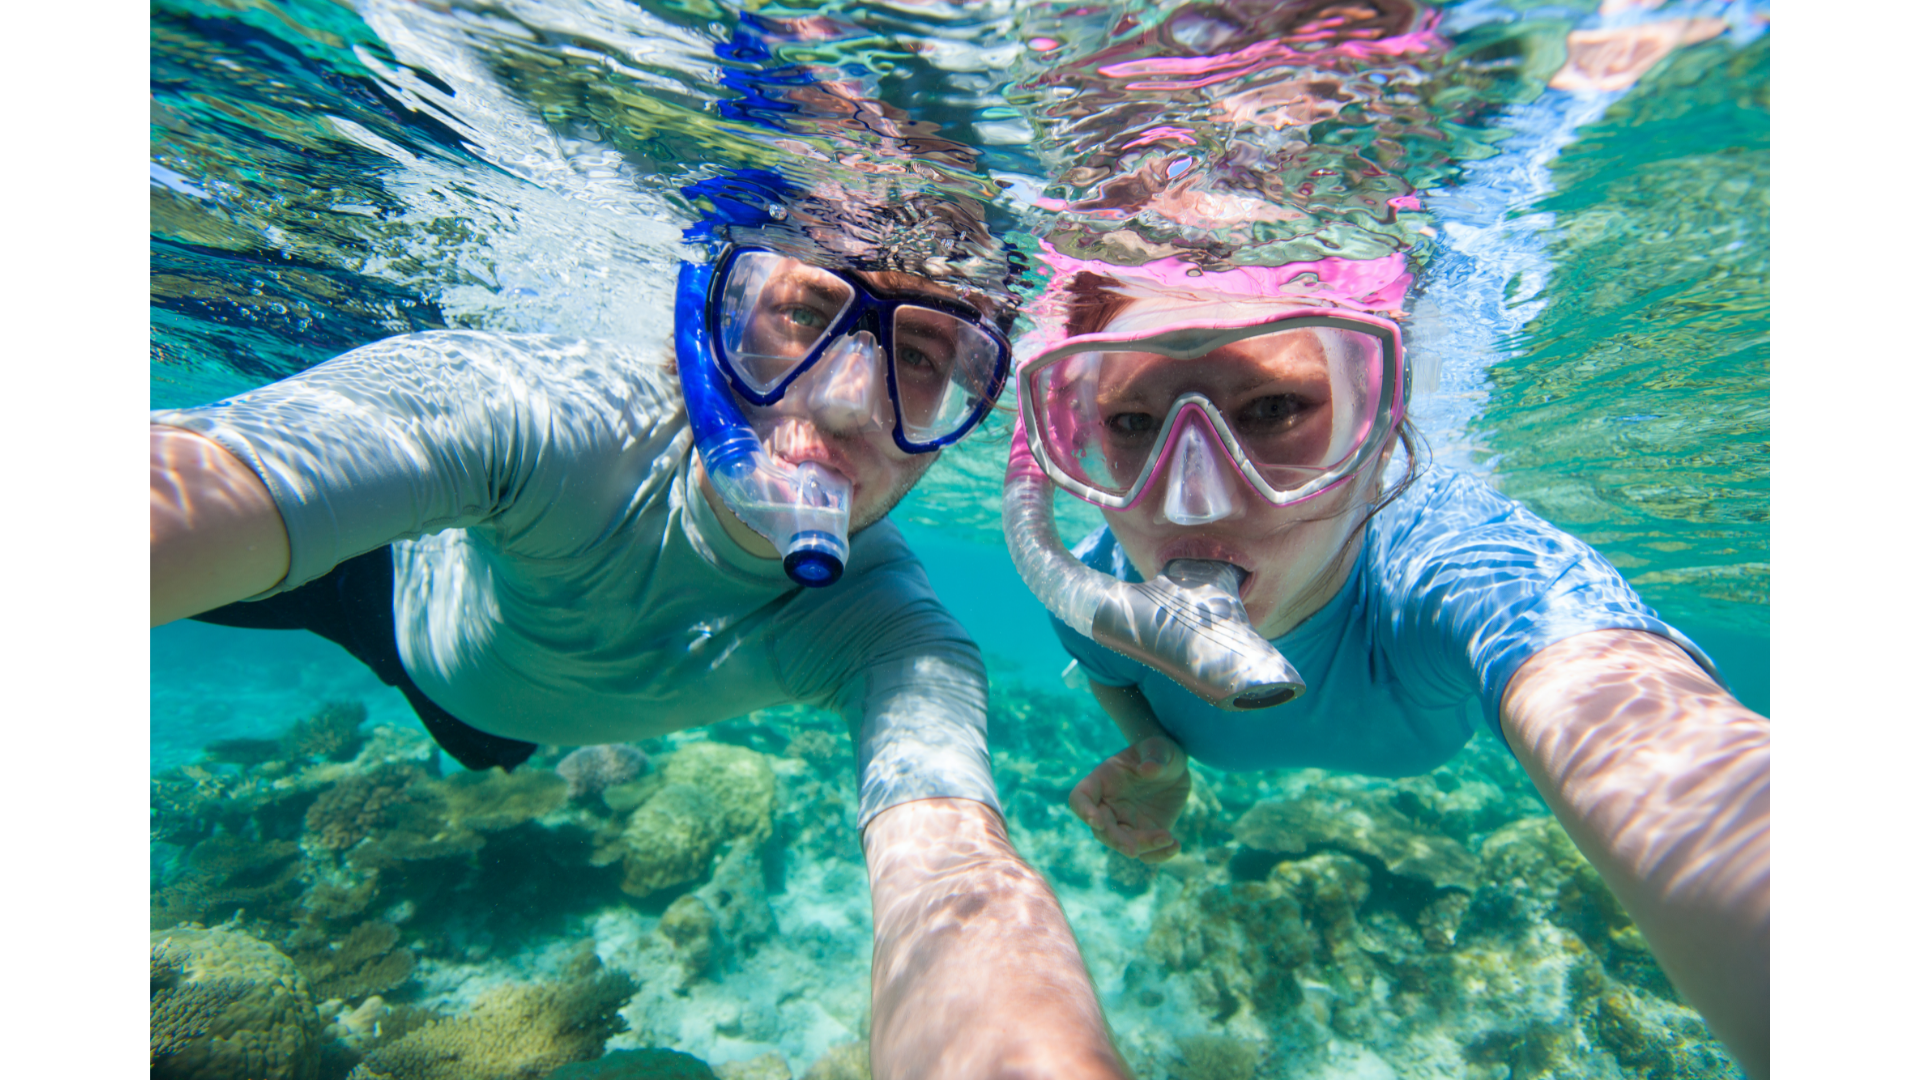 Snorkeling - an activity for the whole family